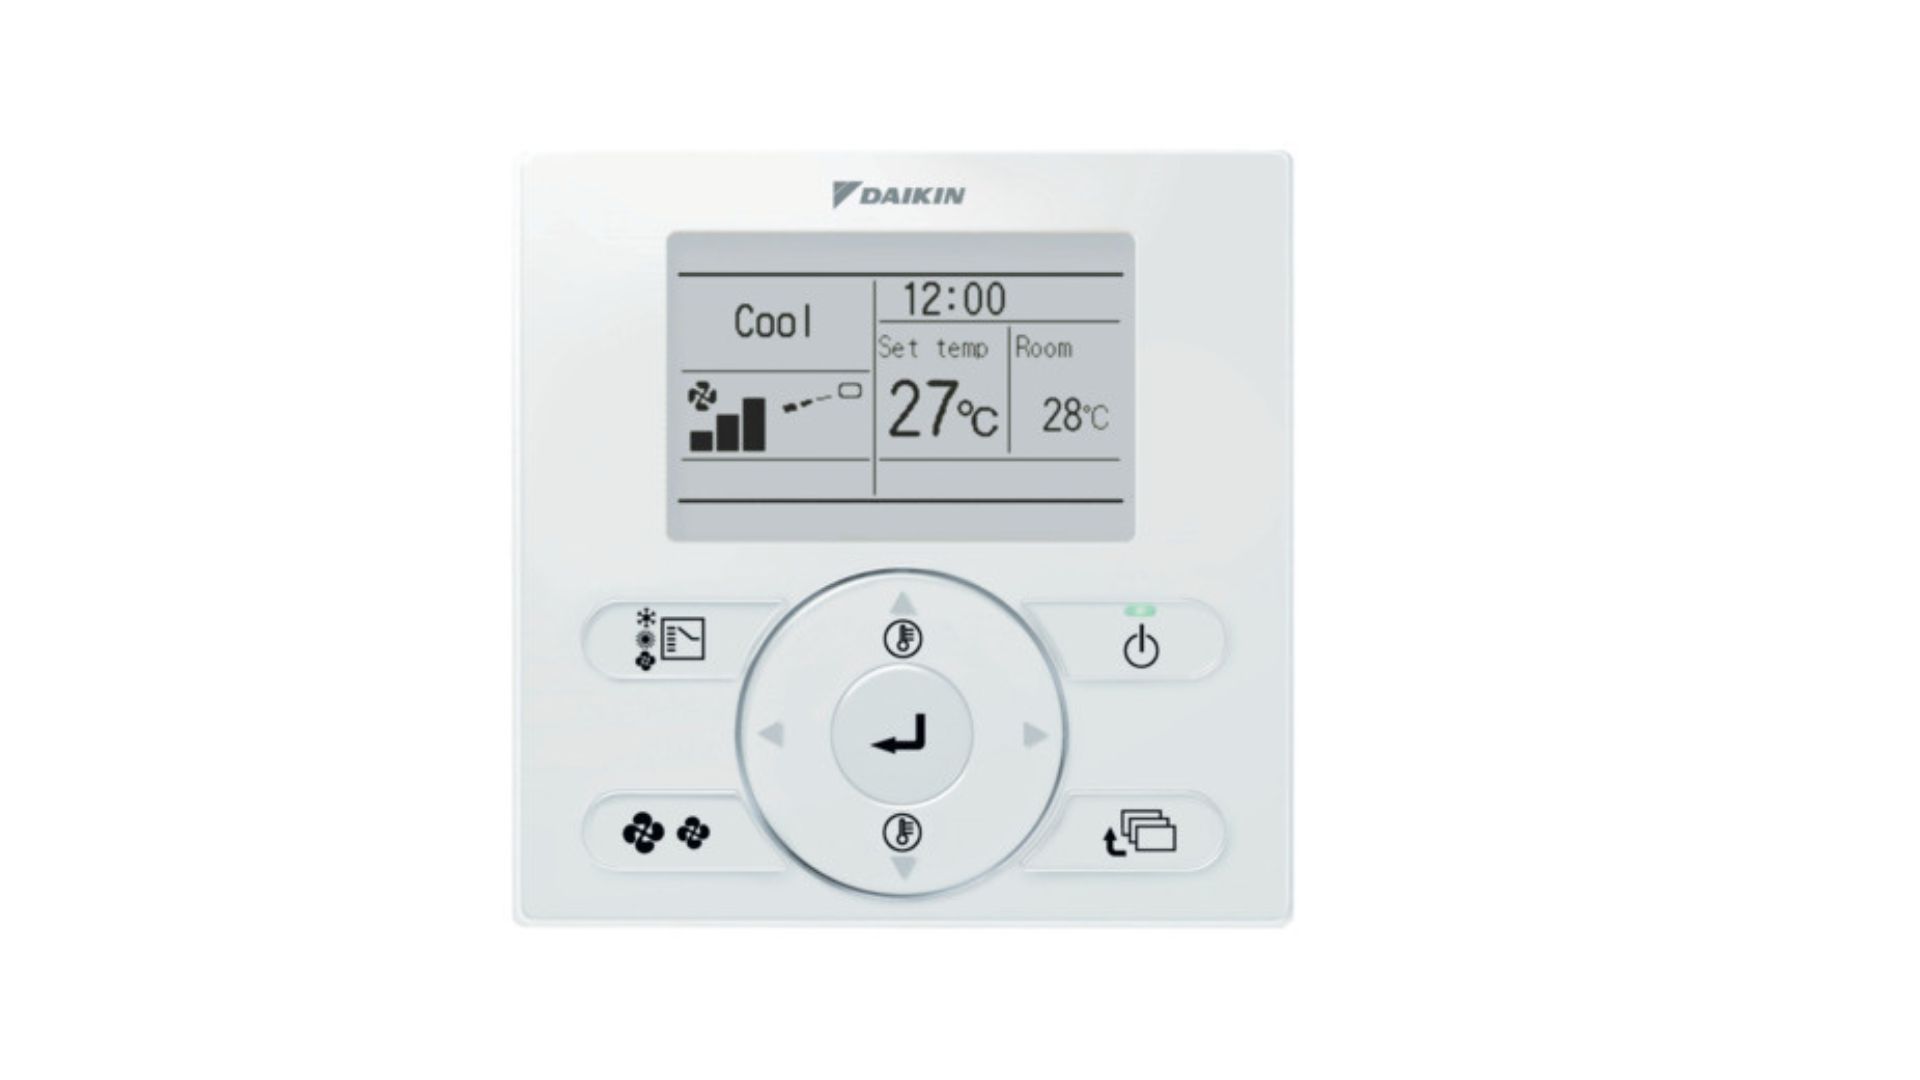 Ducted Aircon Panel control